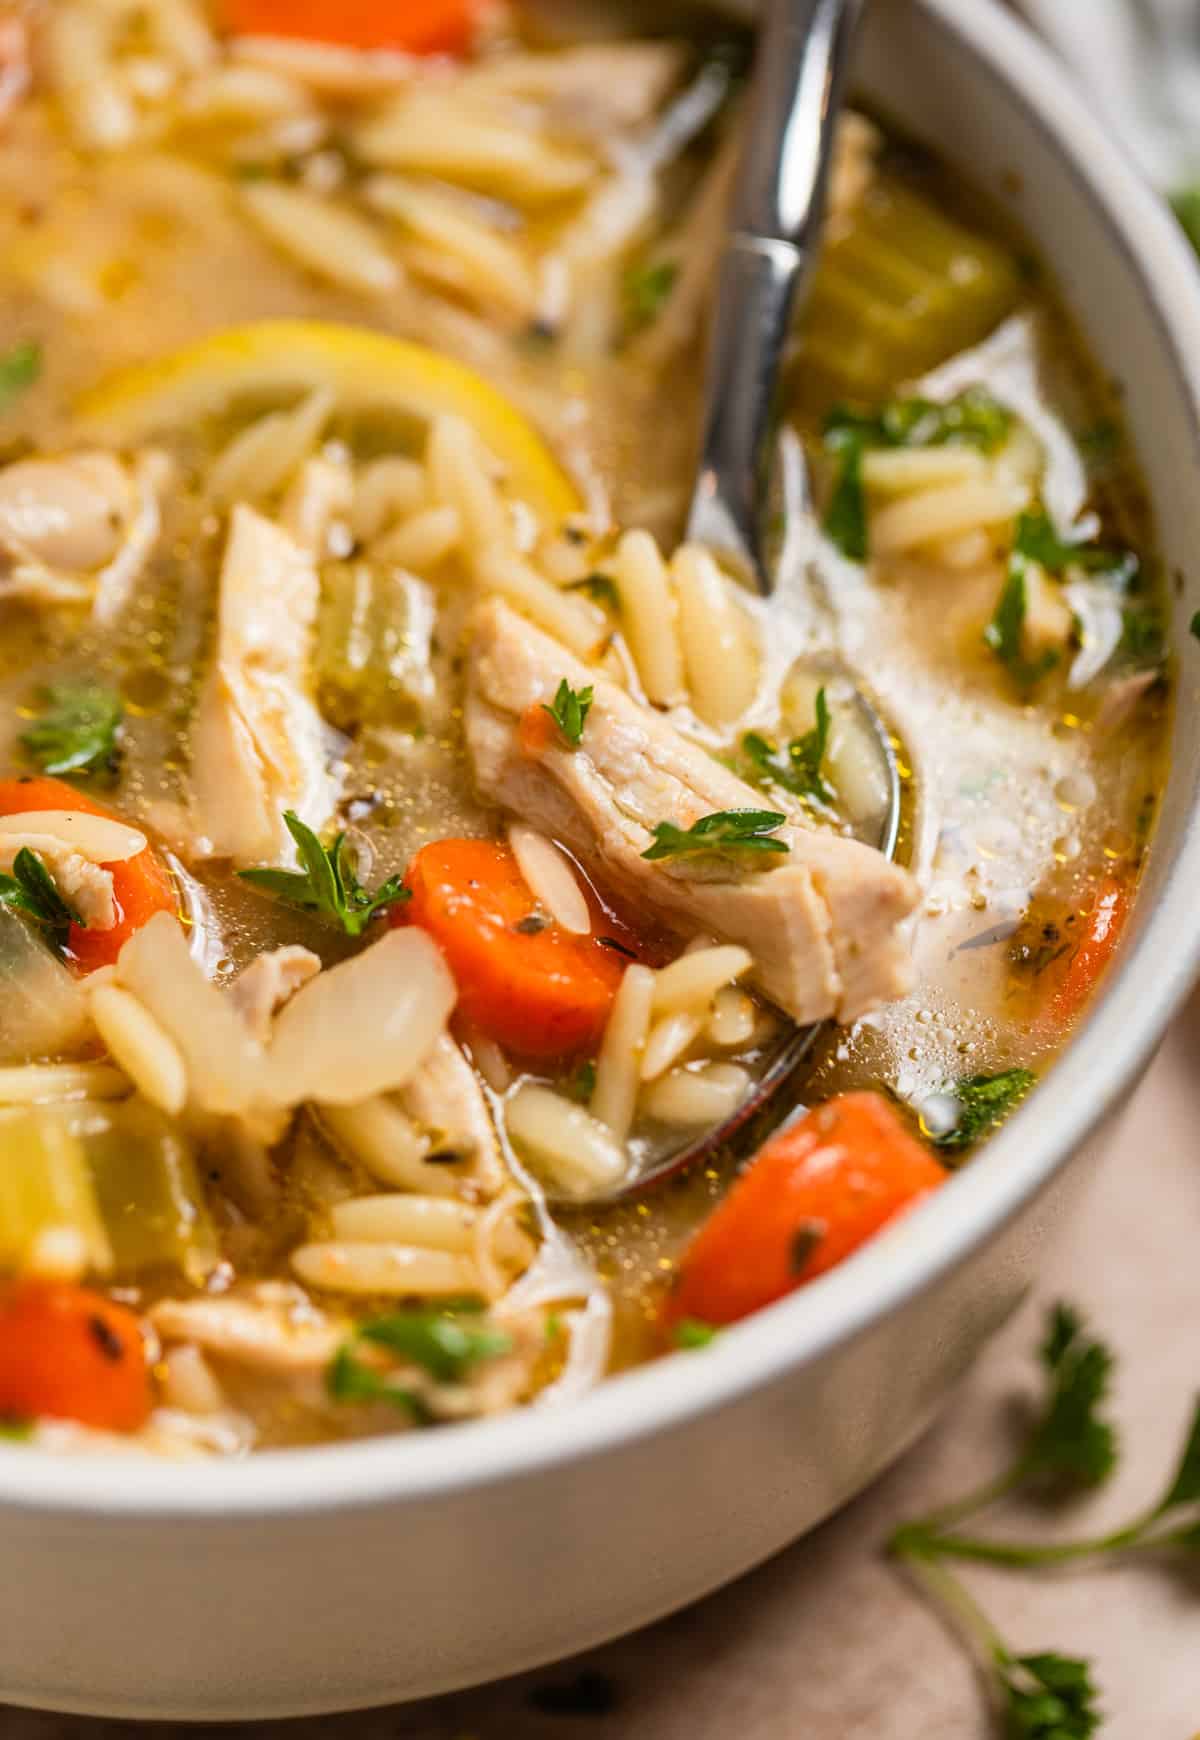 Spoonful of lemon chicken and orzo soup.